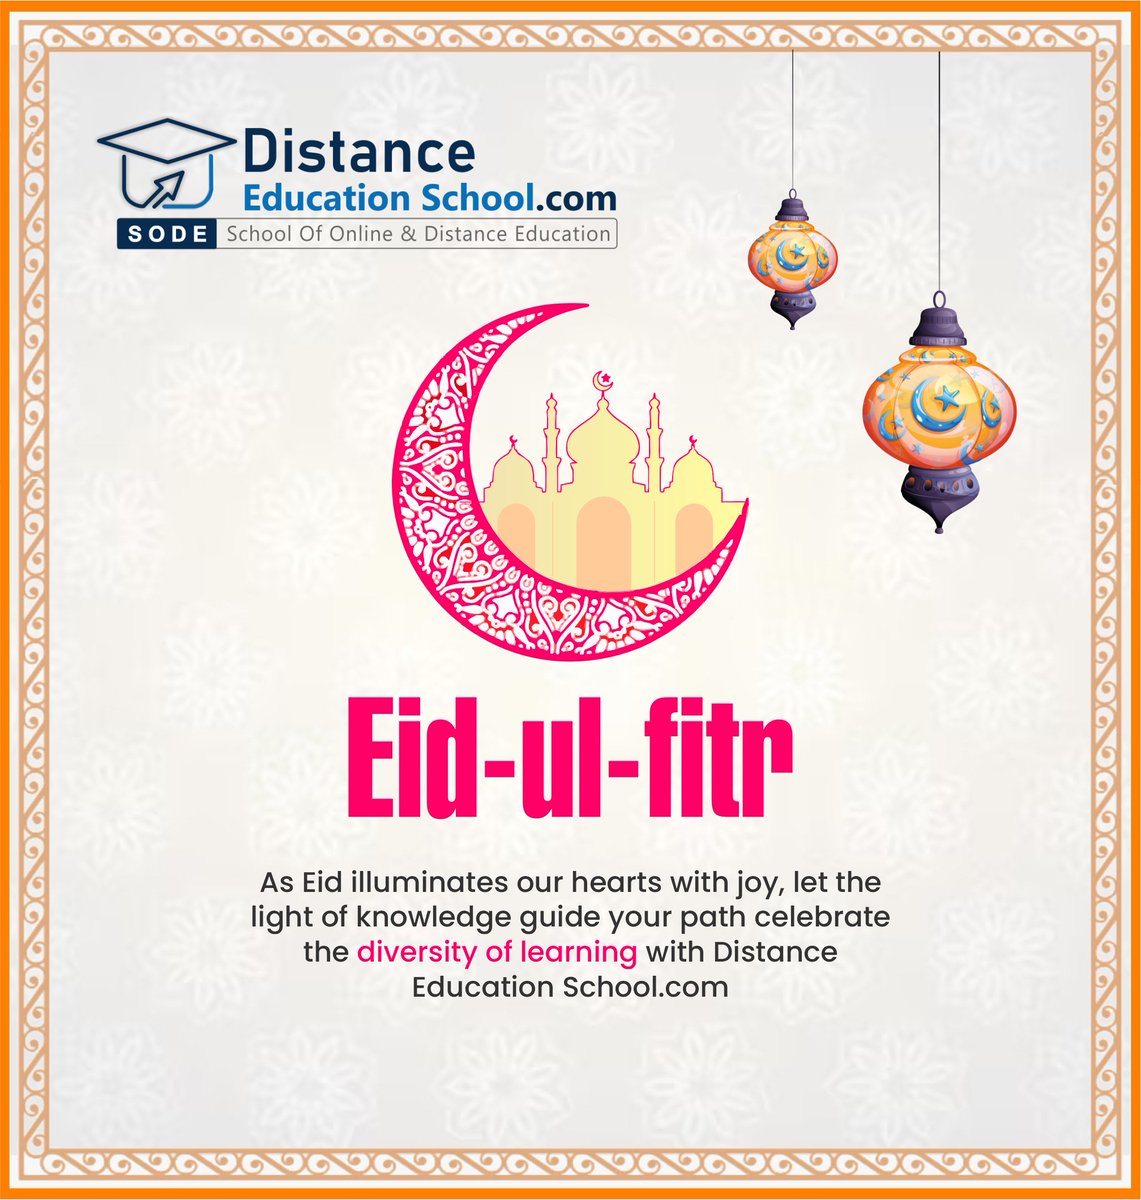 Wishing you a joyous Eid al-Fitr ☪ filled with blessings and happiness. May this special day bring unity, love, and prosperity to all. . #eidulfitr #eid #eidmubarak #ramadan #education #learning #elearning #onlineclasses #distancelearning #online #onlinecourses #virtuallearning